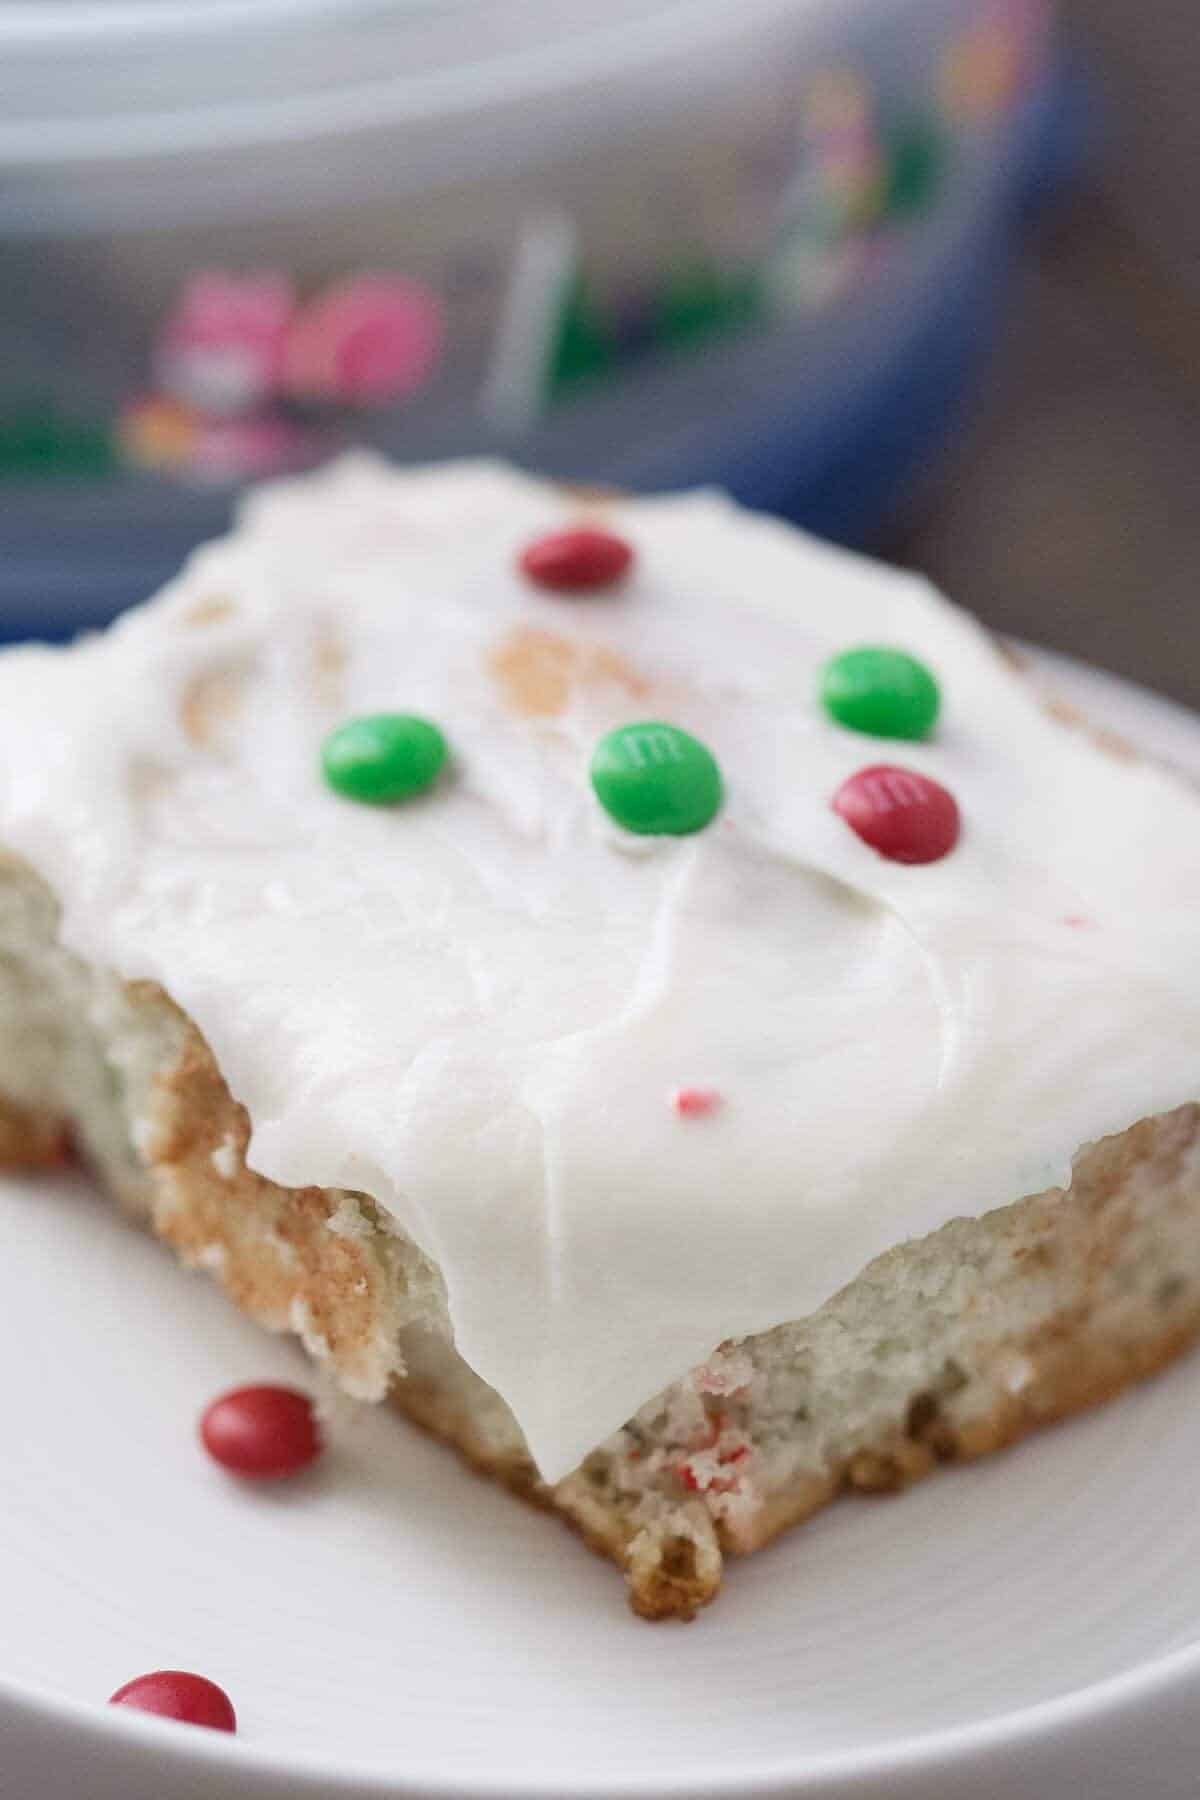 These cake mix cinnamon rolls will make everything festive and fun! 